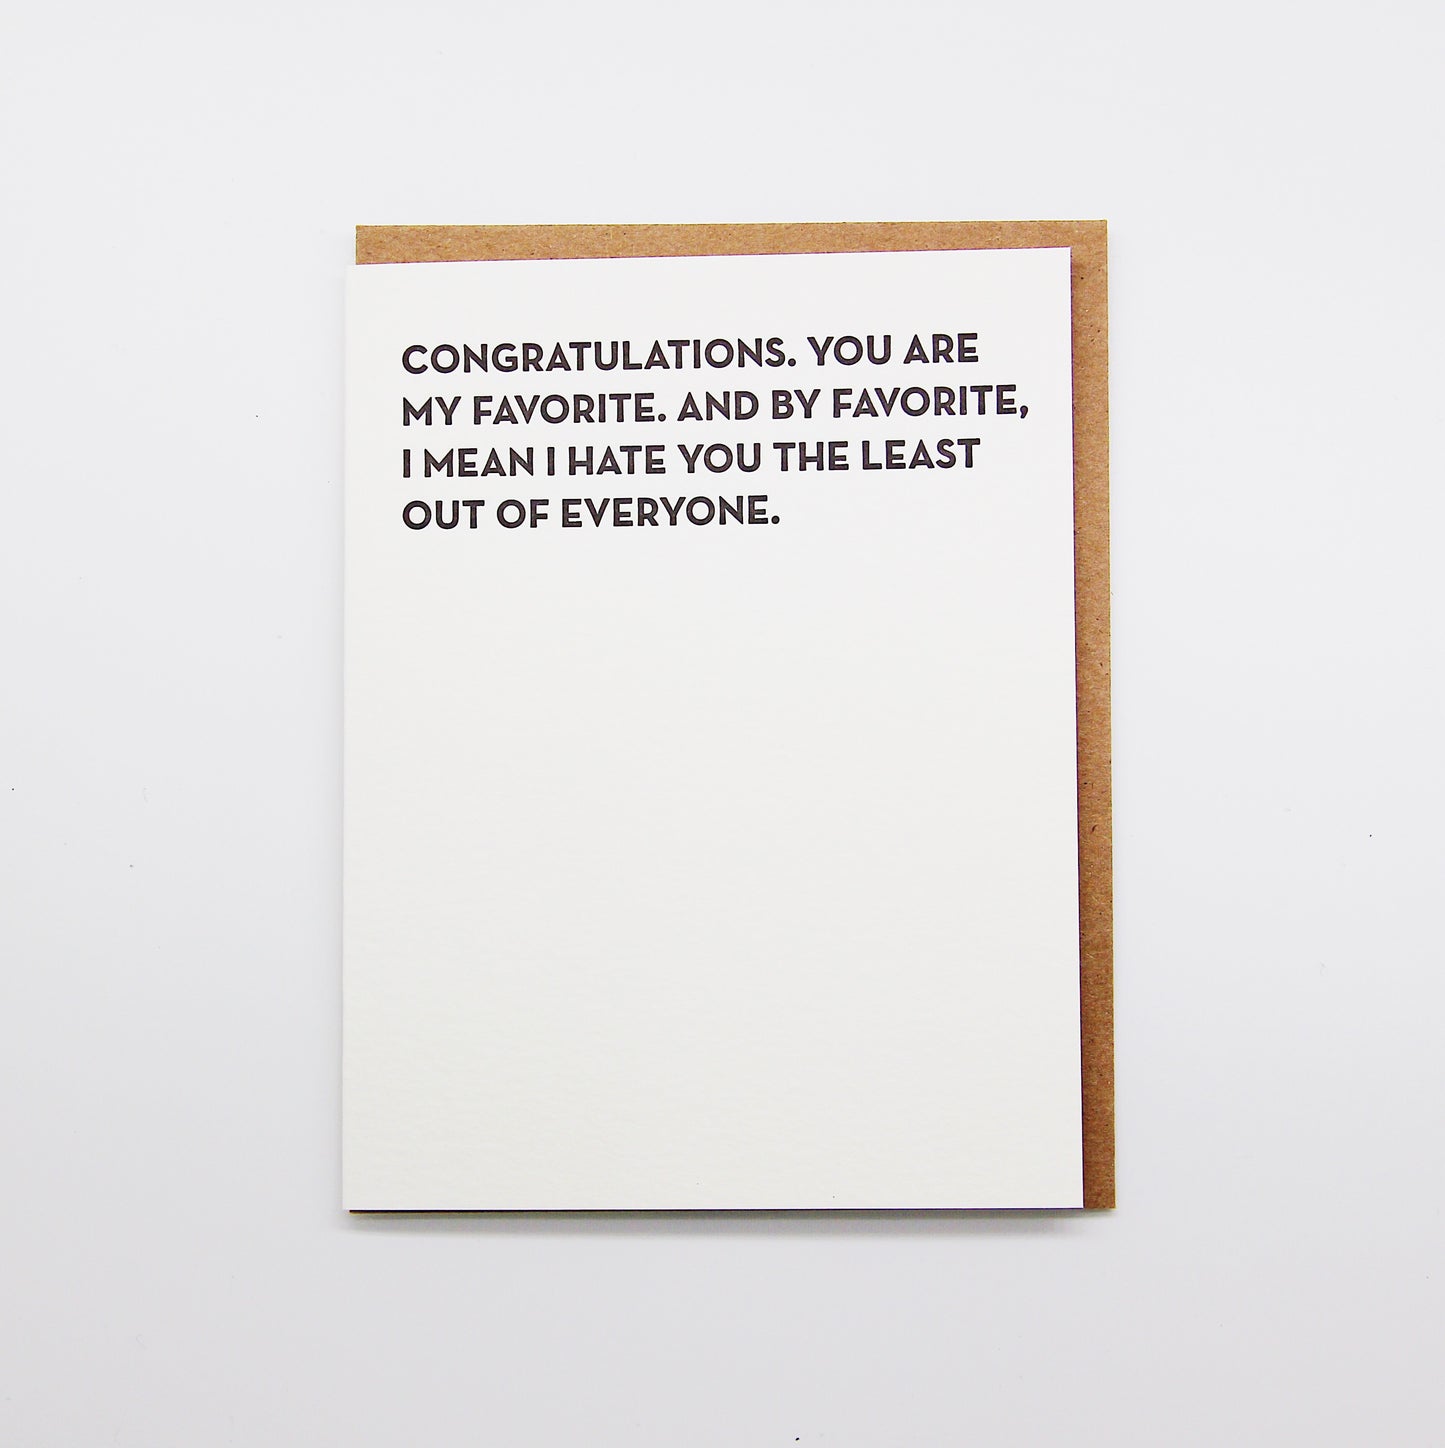 Congratulations. You Are My Favorite card.